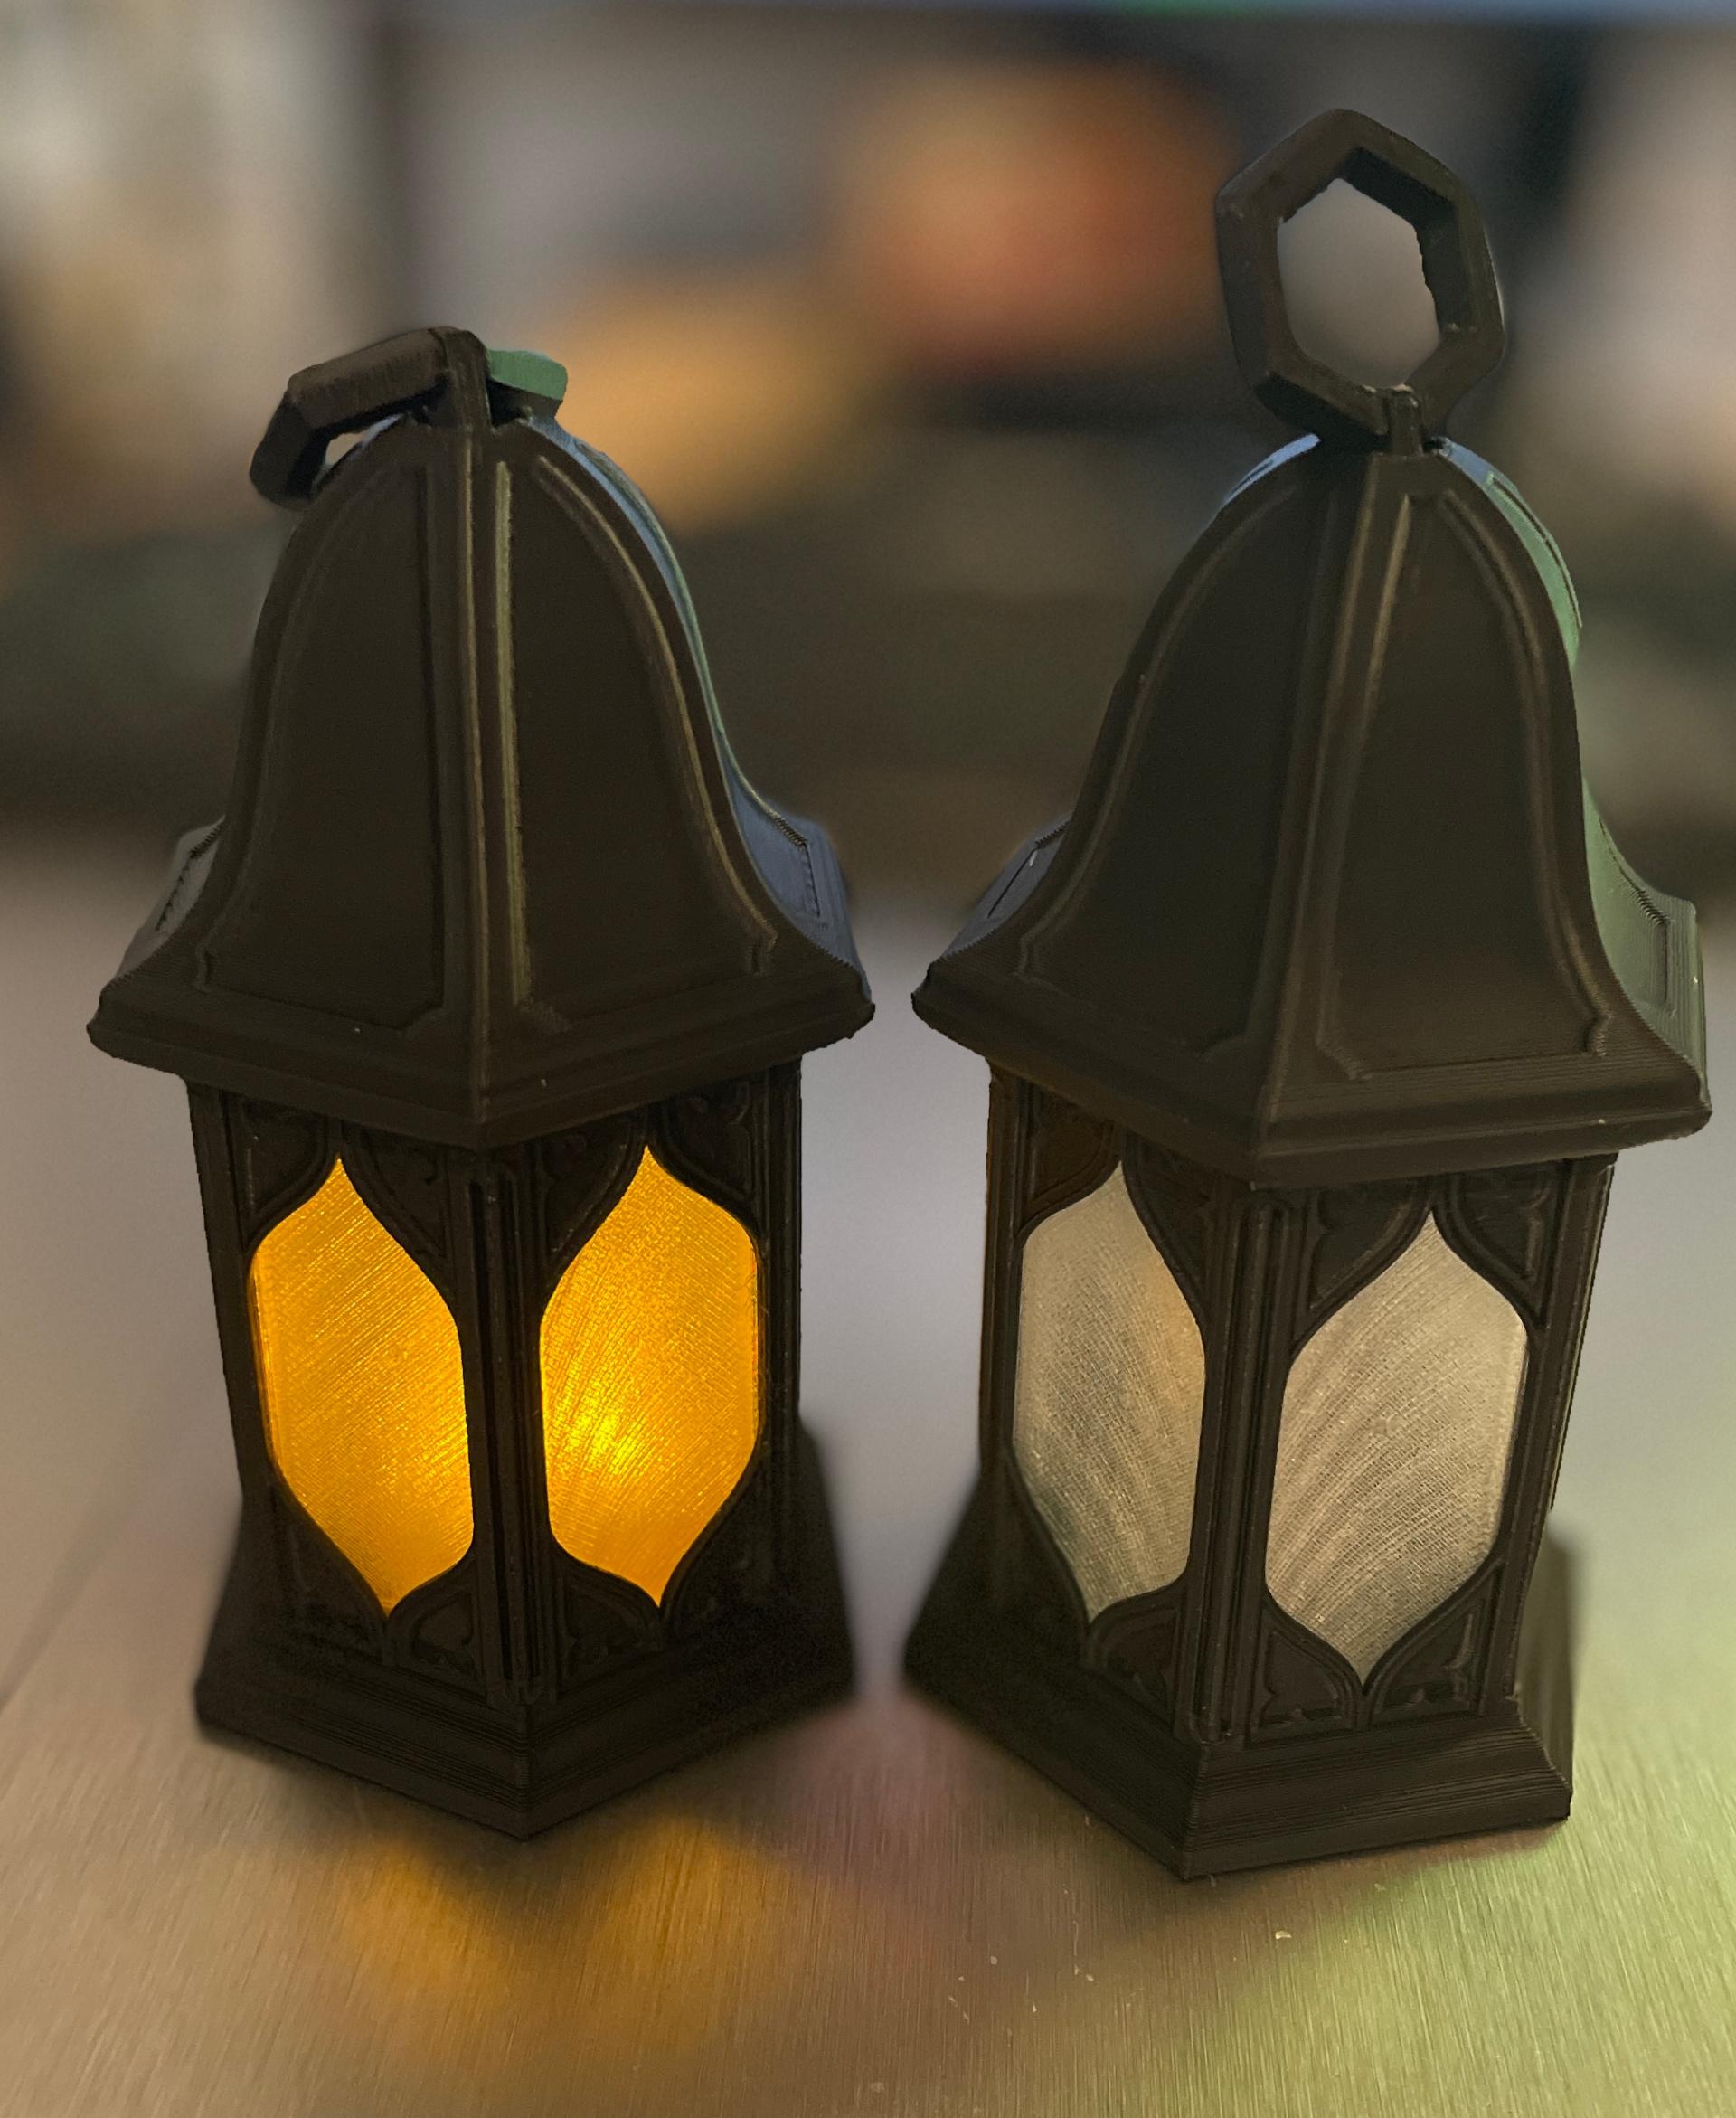 Gothic Lantern  - very nice design, thanks for sharing =)
I scaled it down so that at least one LED tea light goes in. - 3d model